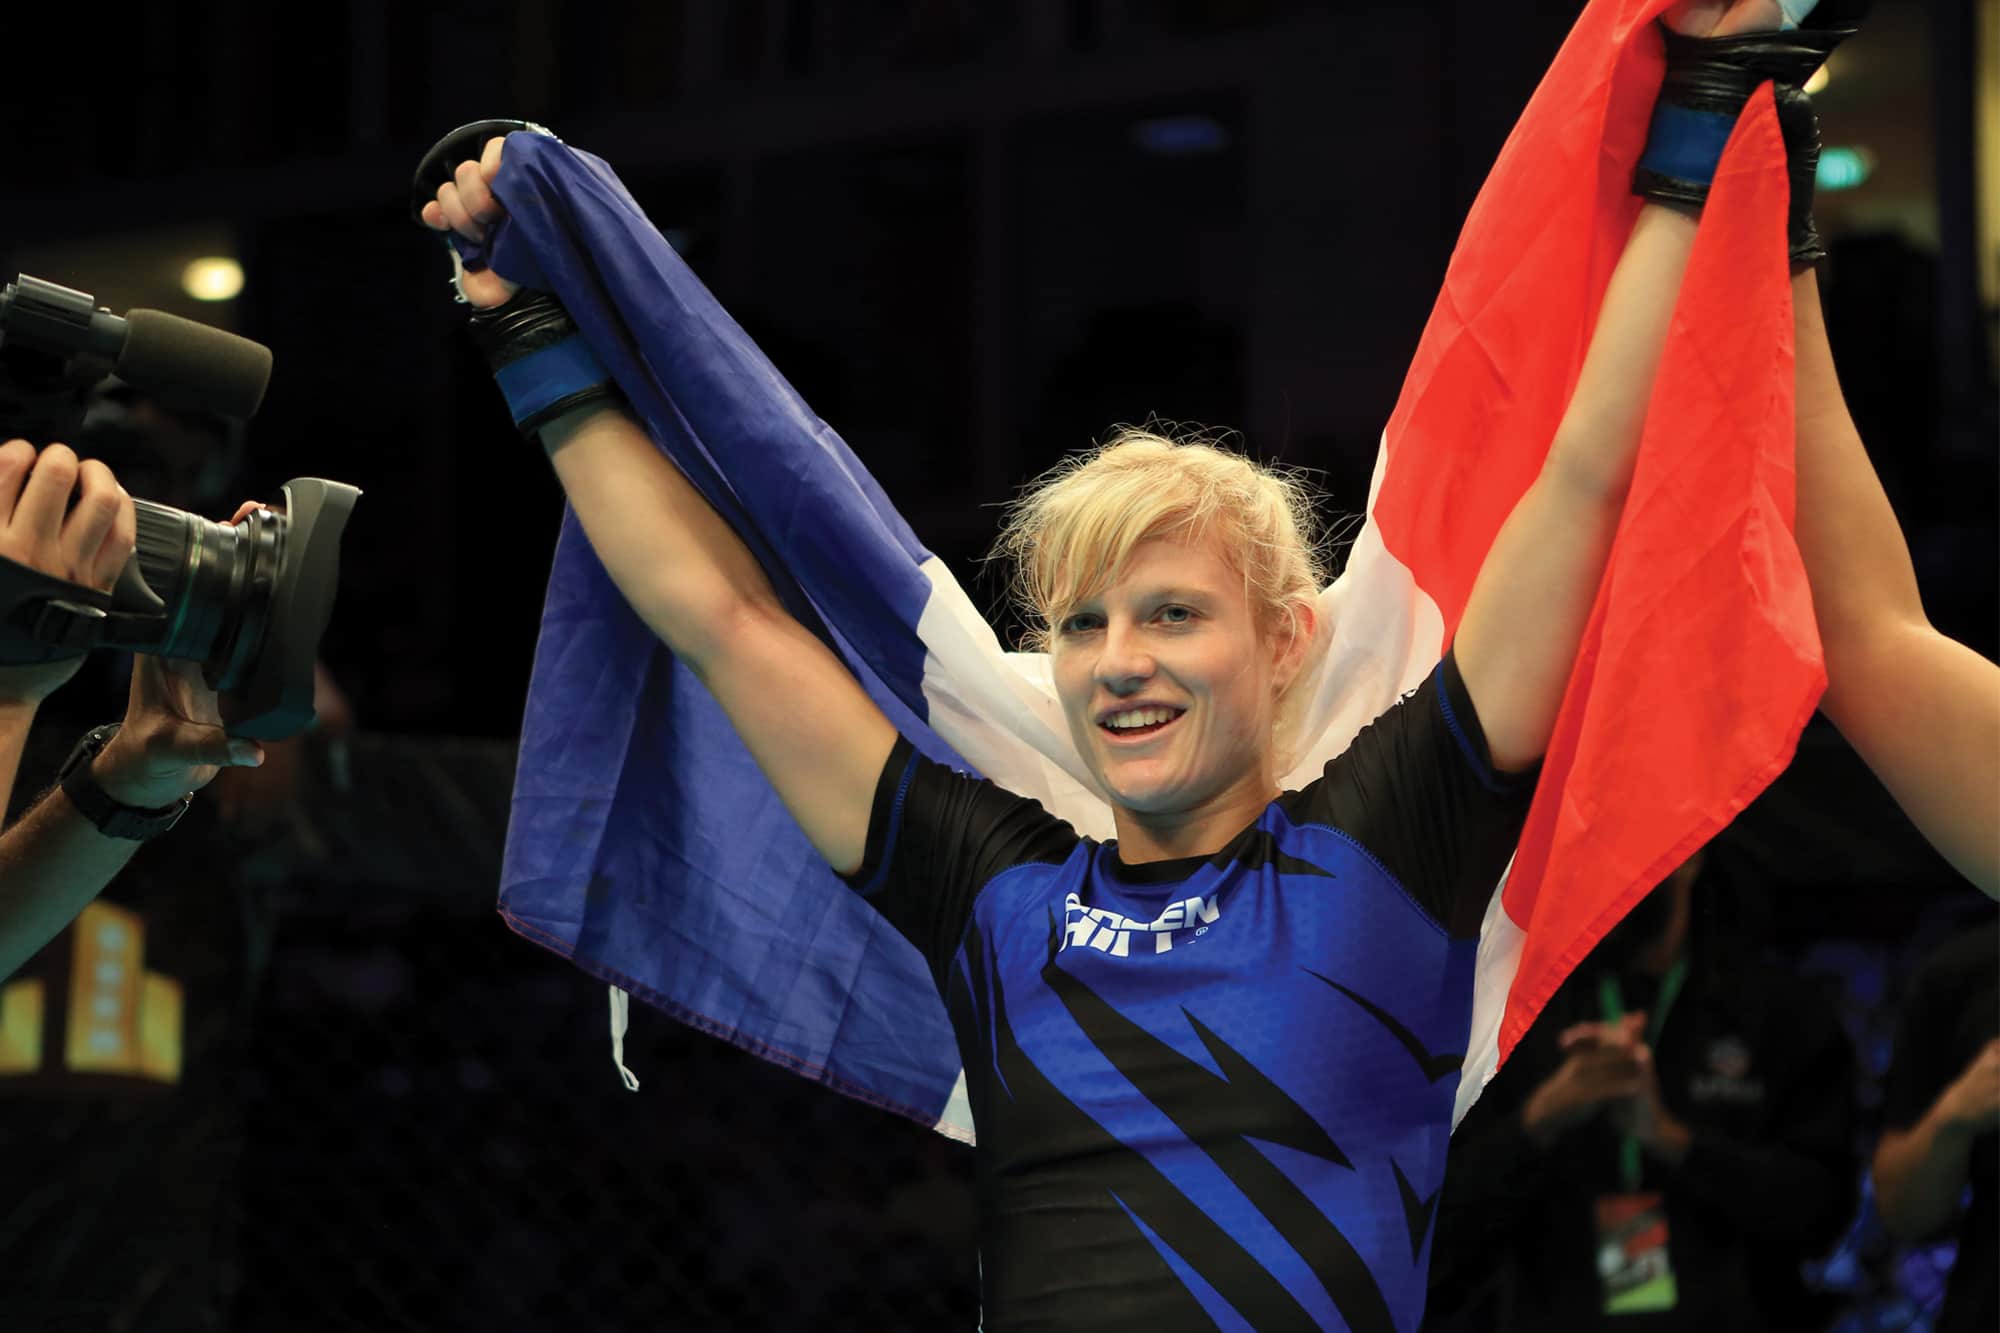 Manon continues to fly the flag for French MMA